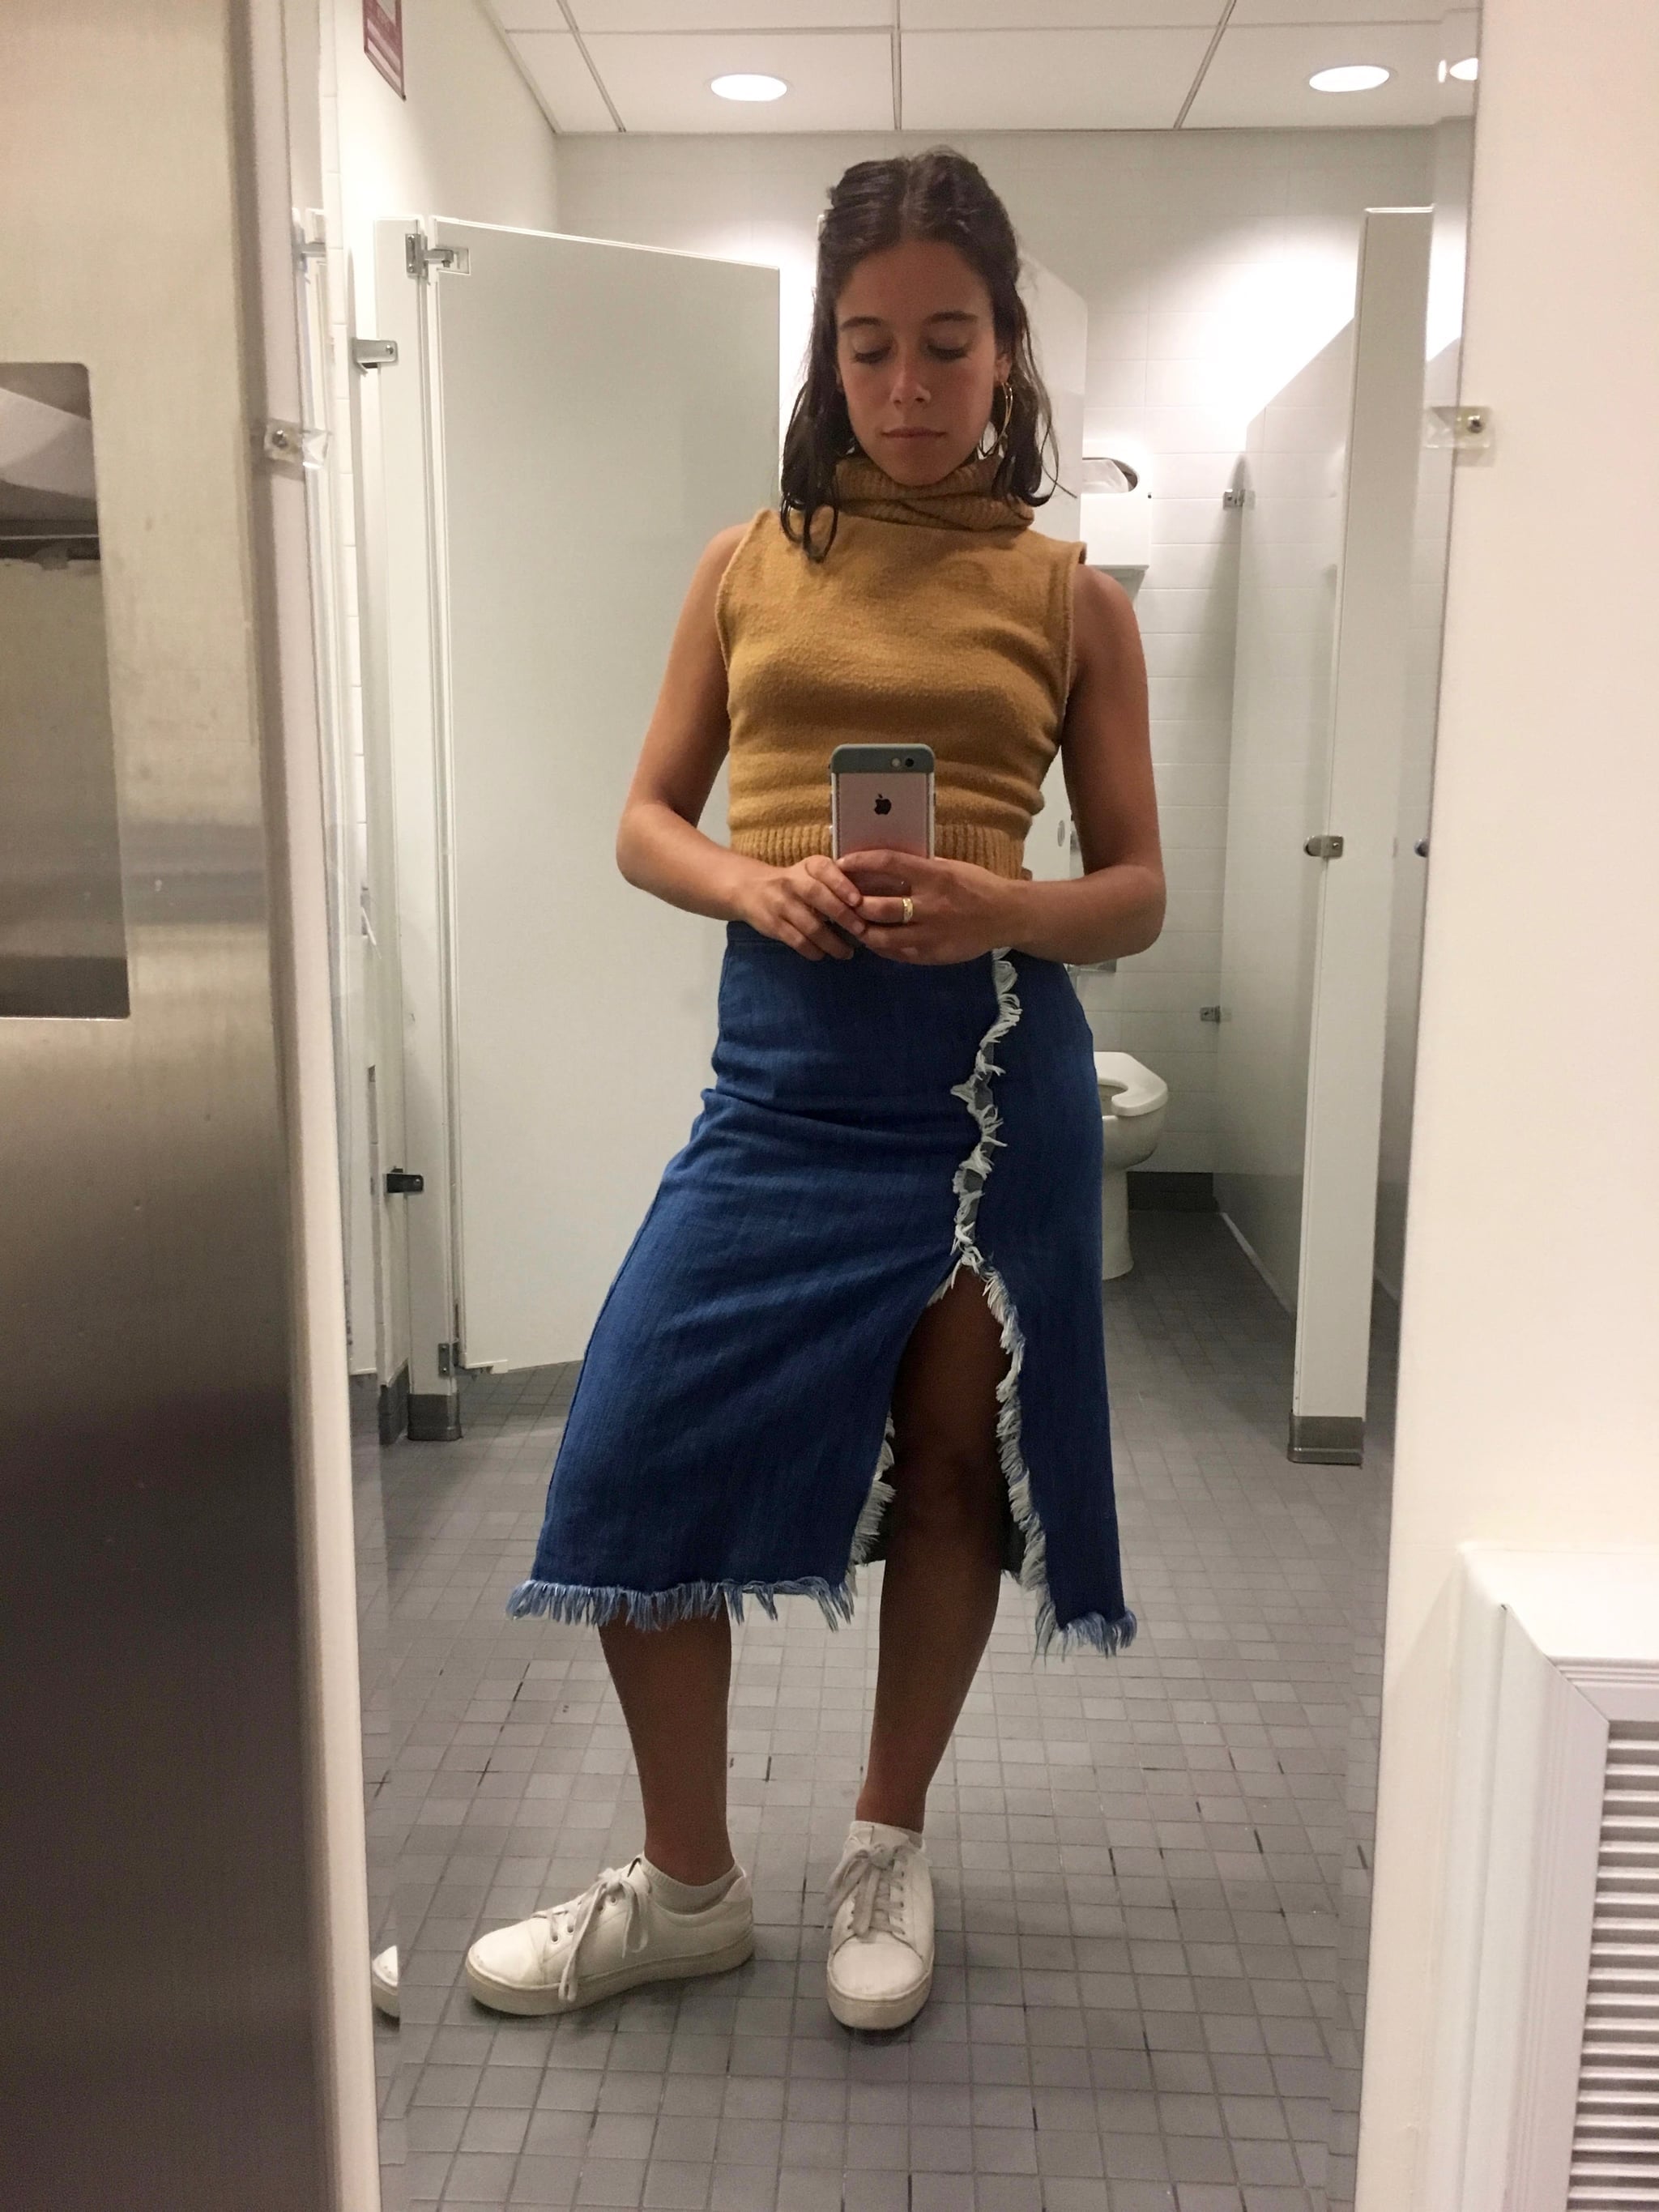 How To Go Braless At Work?